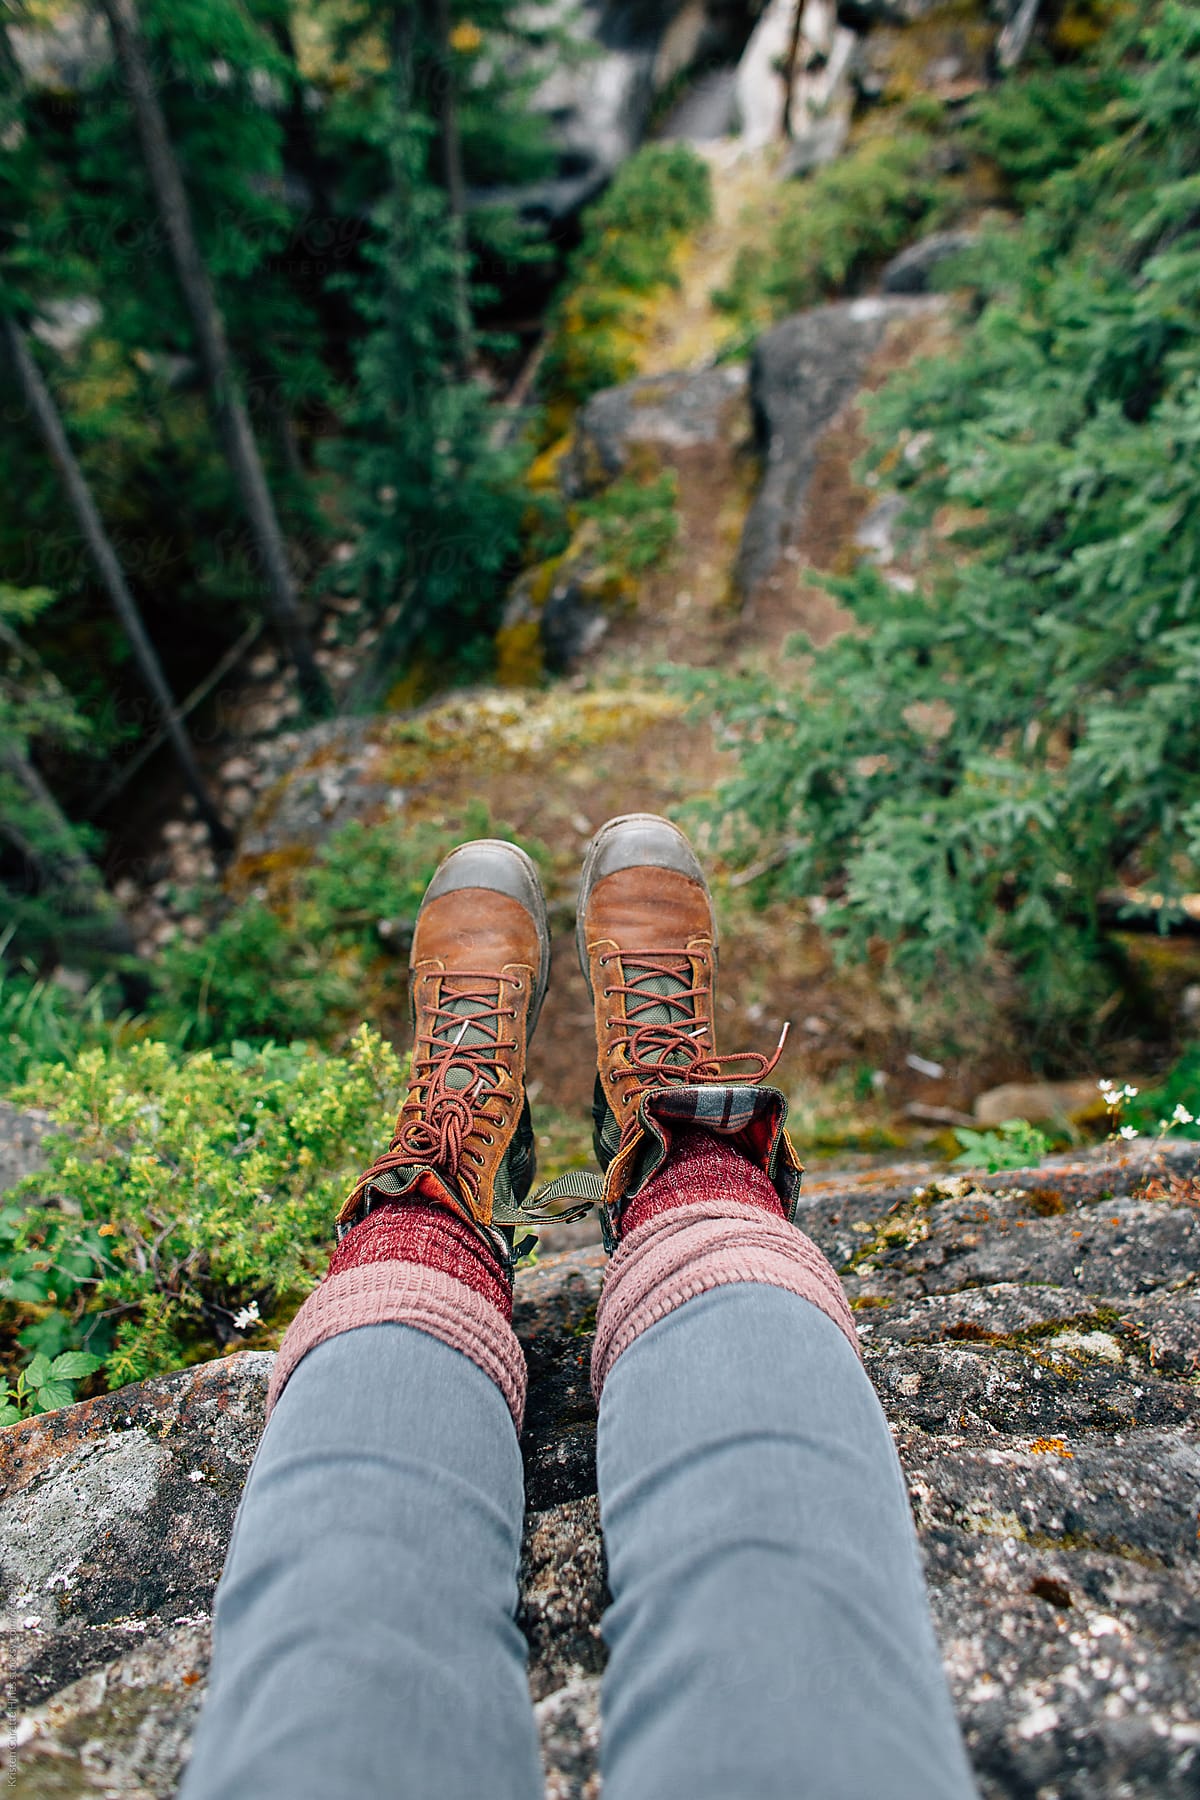 Feet dangling off the edge of a cliff outdoors in nature